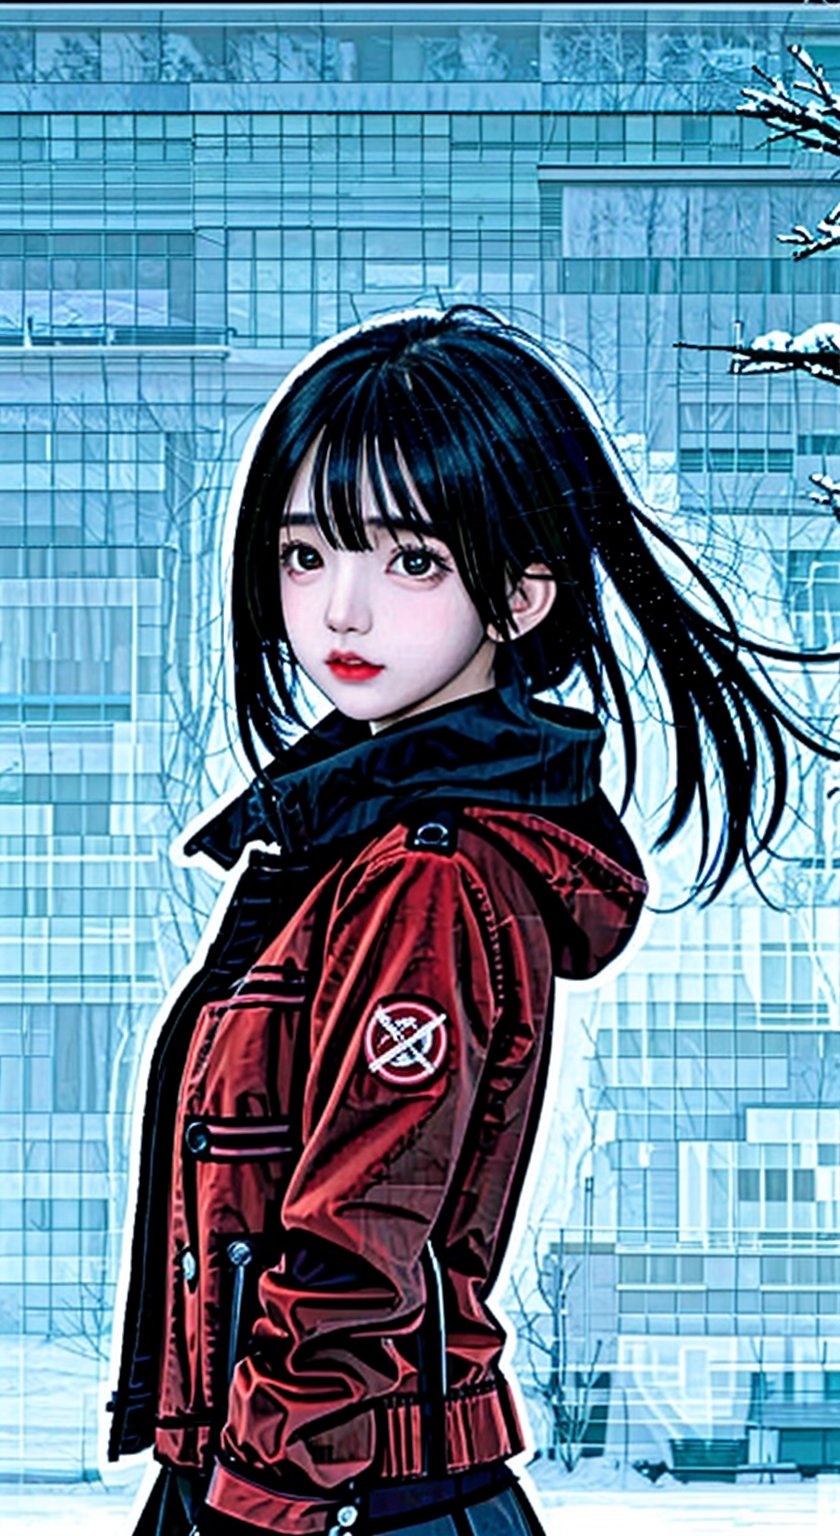  A short-haired girl standing in the snow, Red Coat, head up, breeze blowing hair, snow, snowflakes, depth of field, telephoto lens, messy hair, (close-up) , (sad) , sad and melancholy atmosphere, reference movie love letter, profile, head up, ((floating)) bangs or fringes of hair, eyes focused, half-closed, center frame, bottom to top,
,<lora:659111690174031528:1.0>,<lora:659111690174031528:1.0>